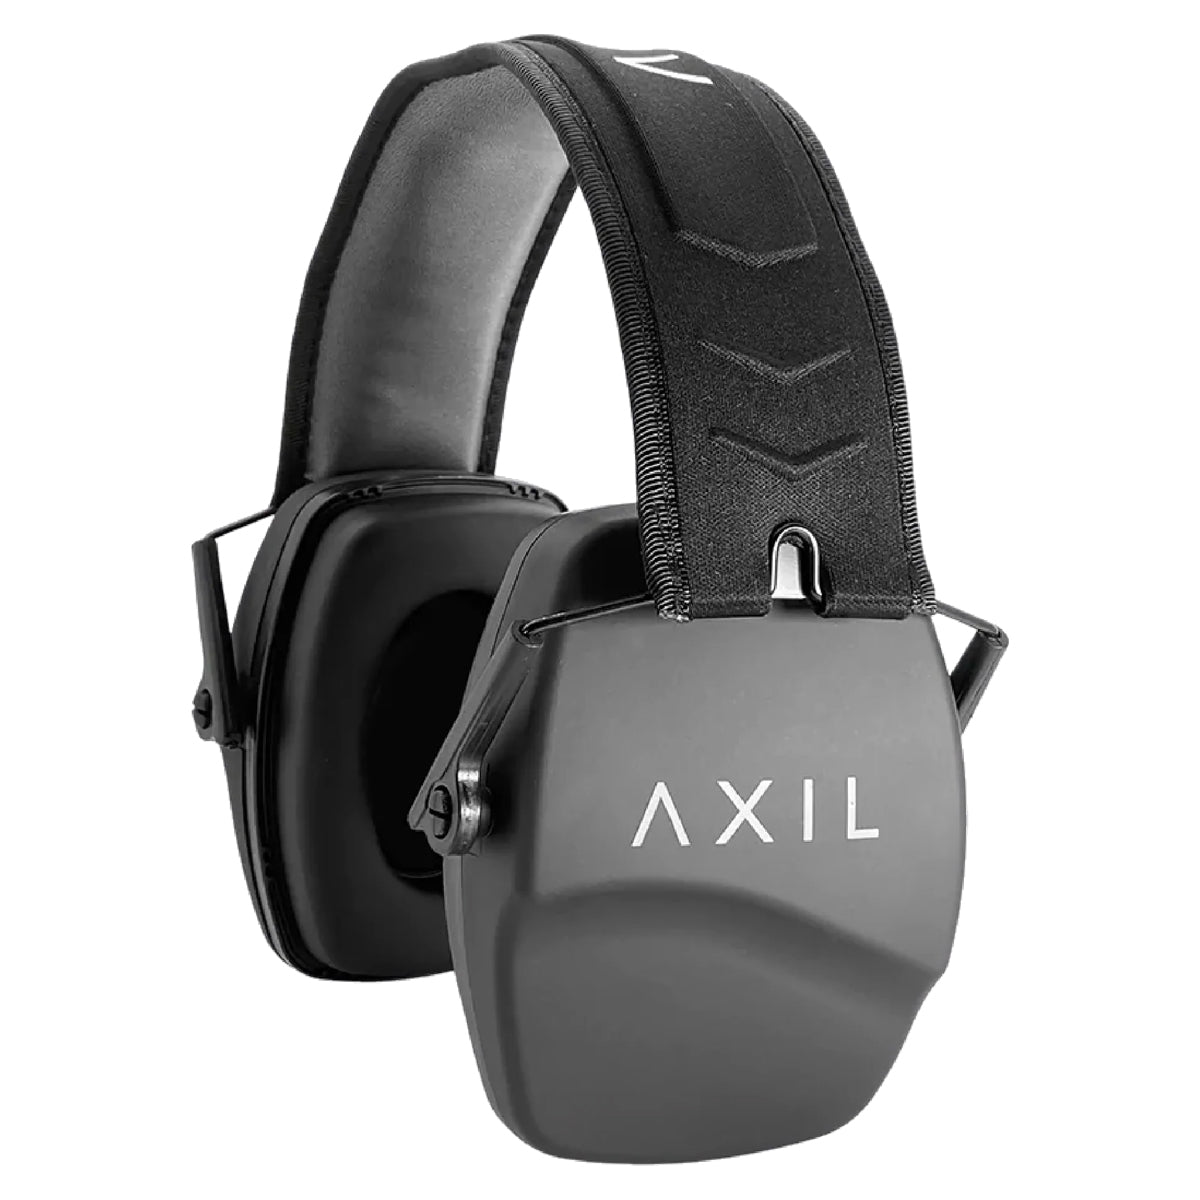 Axil Trackr Passive Ear Muffs in  by GOHUNT | Axil - GOHUNT Shop